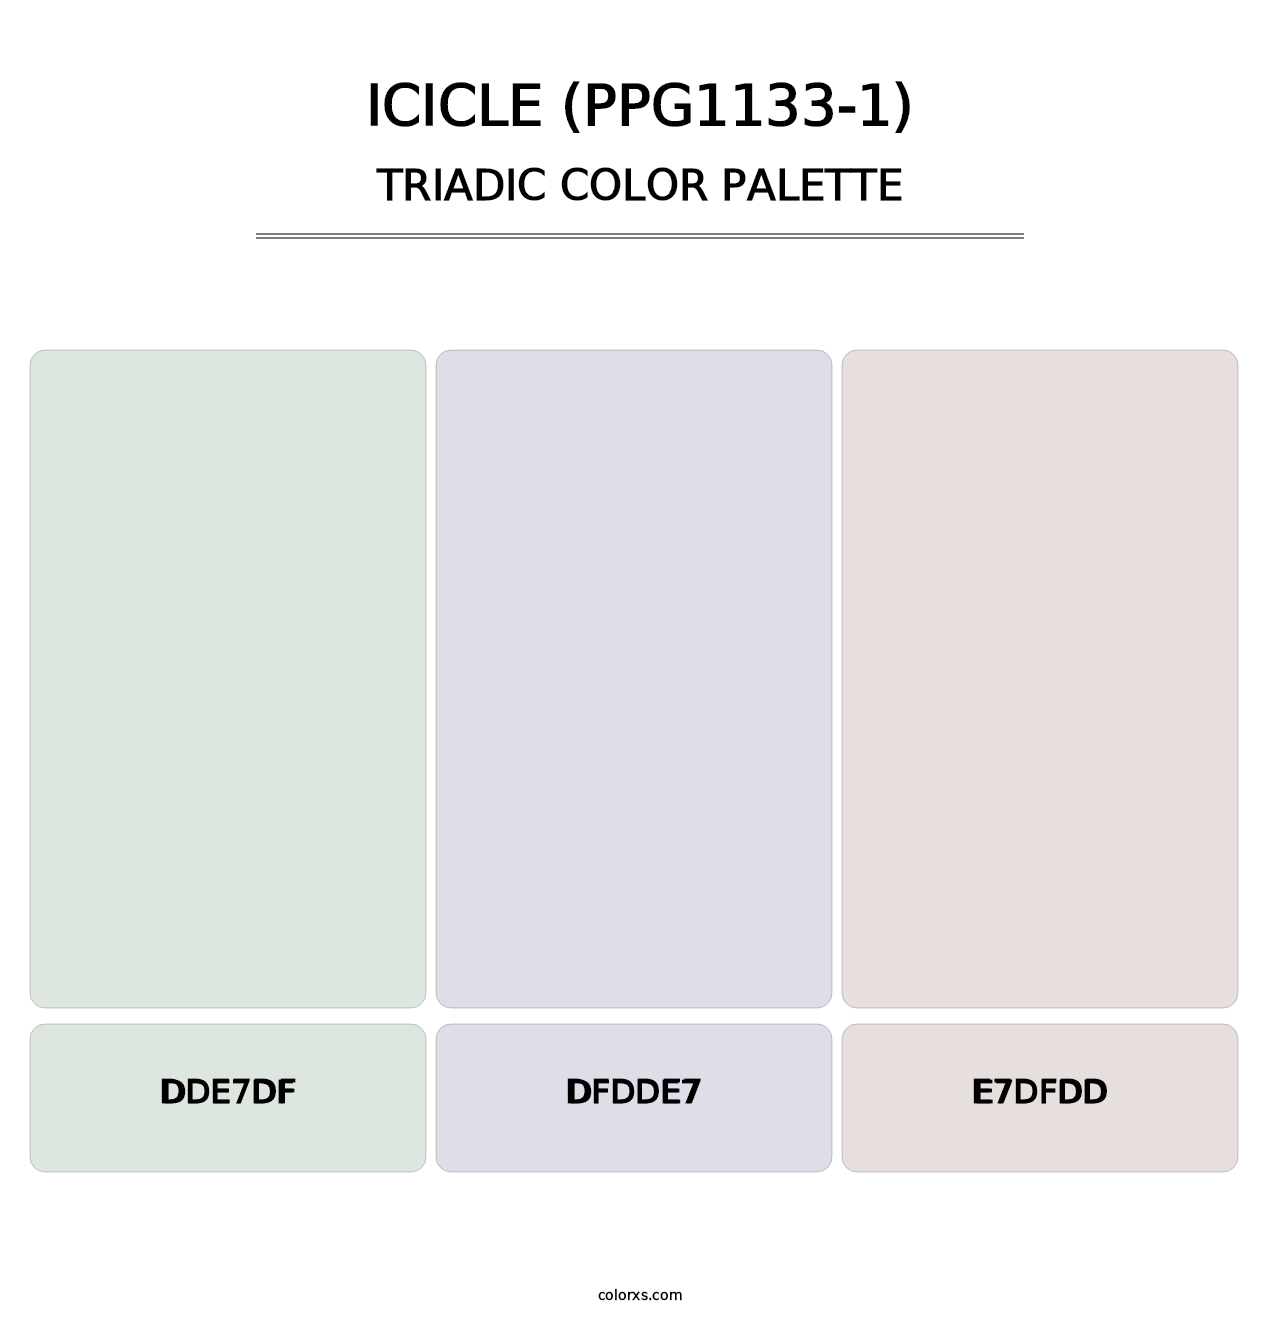 Icicle (PPG1133-1) - Triadic Color Palette